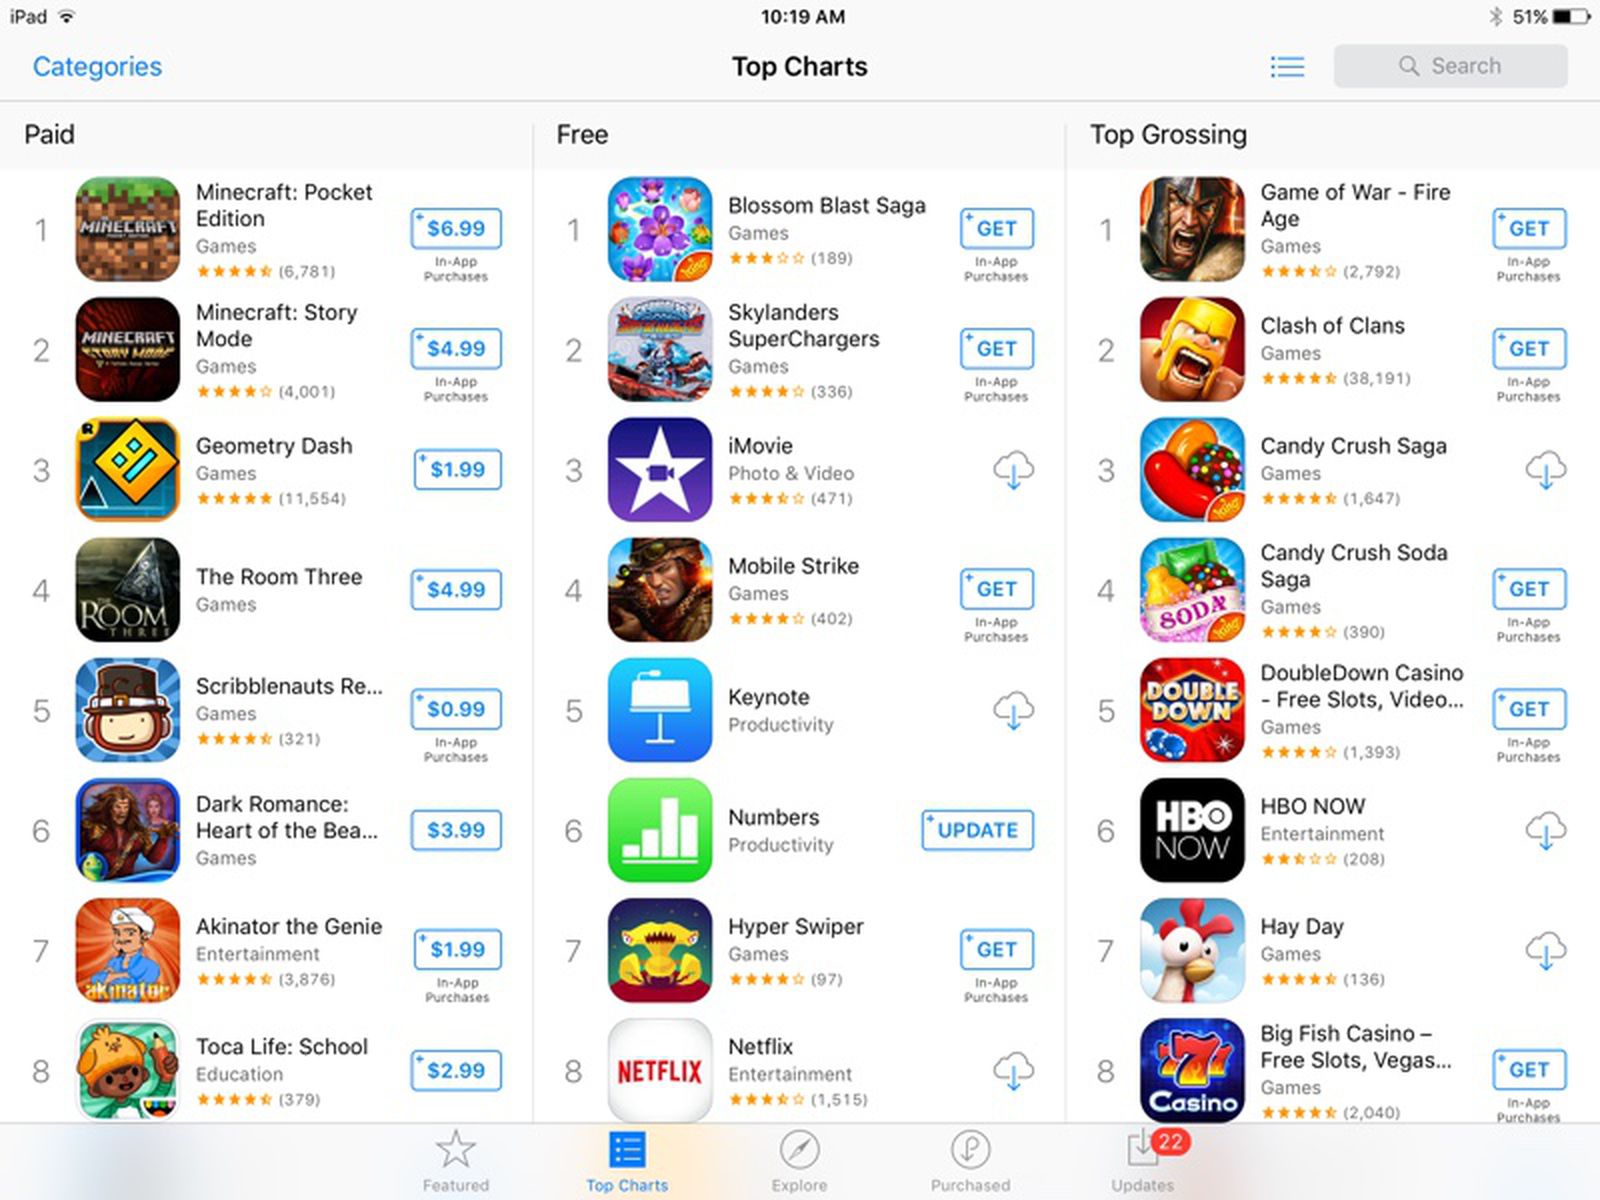 navneord underjordisk chauffør Apple's Top Free Charts Incorrectly Ranking Apple Apps on Some iOS Devices  - MacRumors